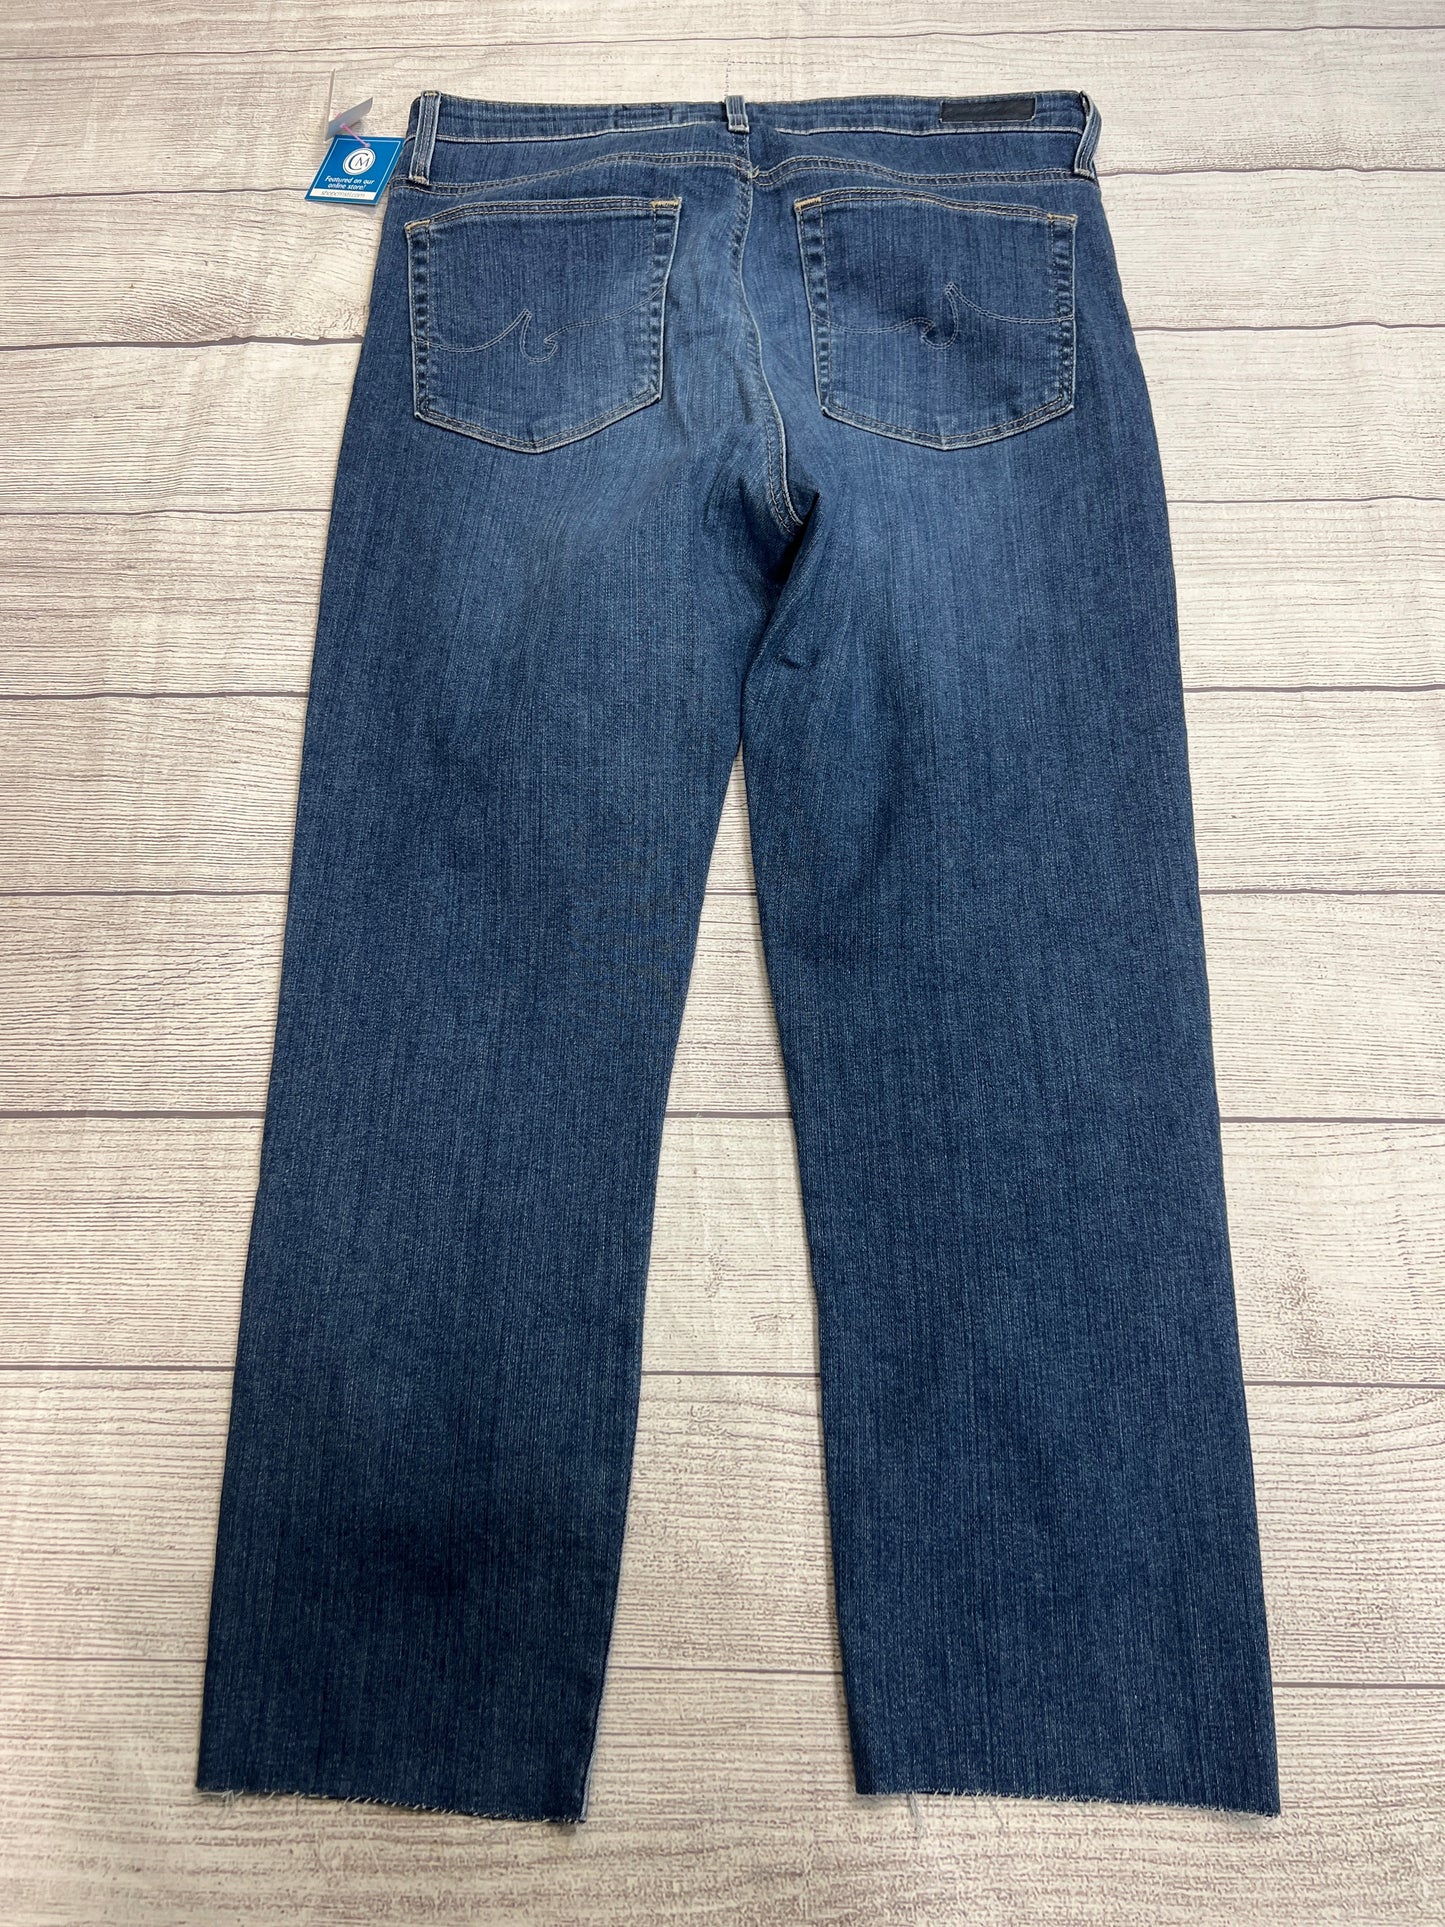 Jeans Designer By Adriano Goldschmied  Size: 12/31